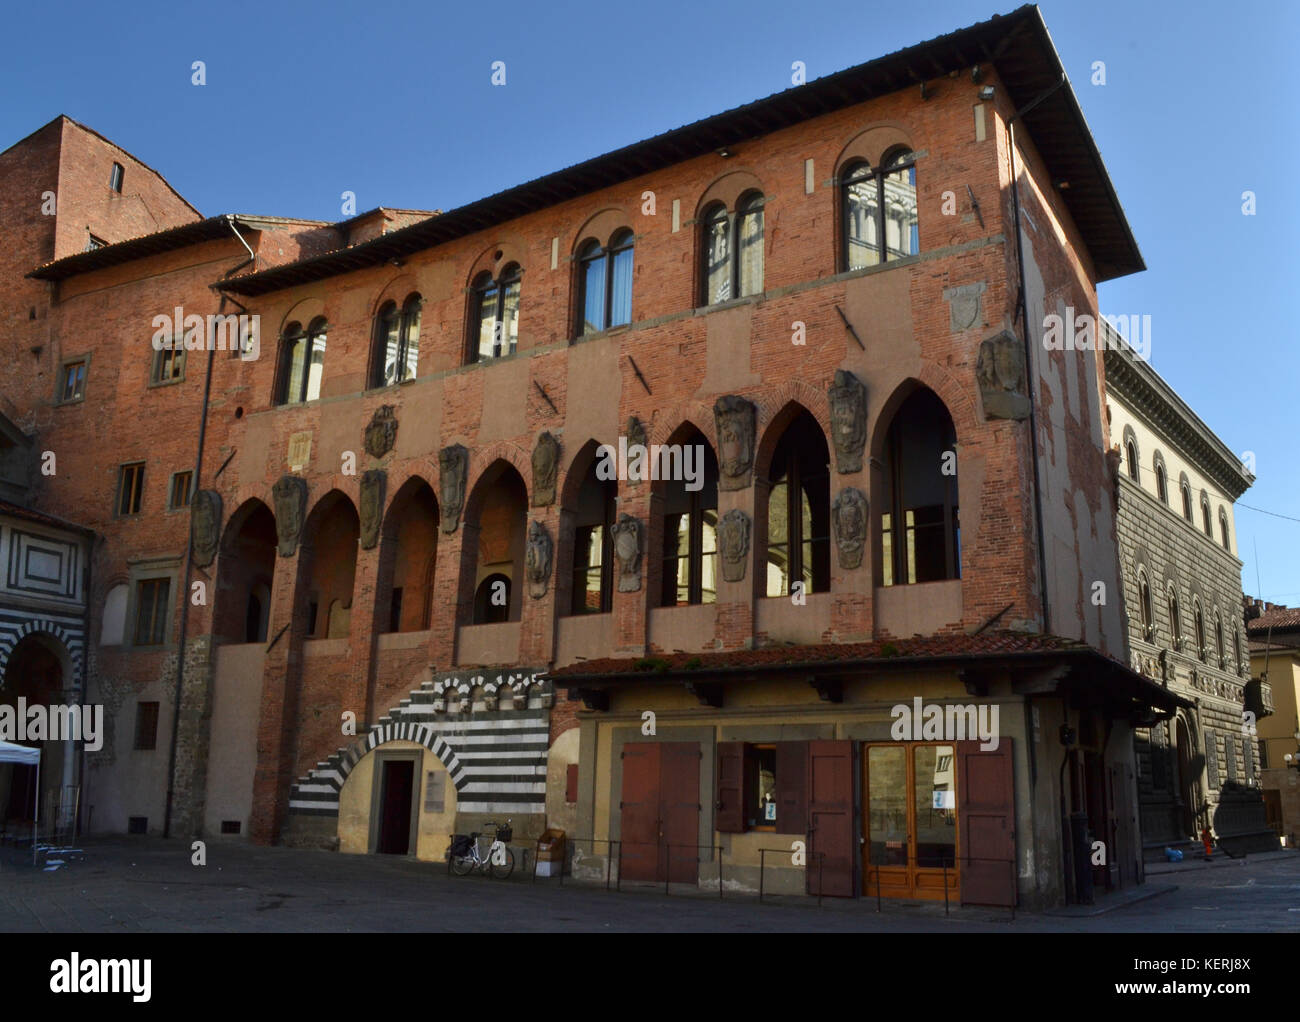 Medieval facade of Palazzo dei Vescovi in Pistoia, with typical Italian loggia and gothic pointed arches. Stock Photo